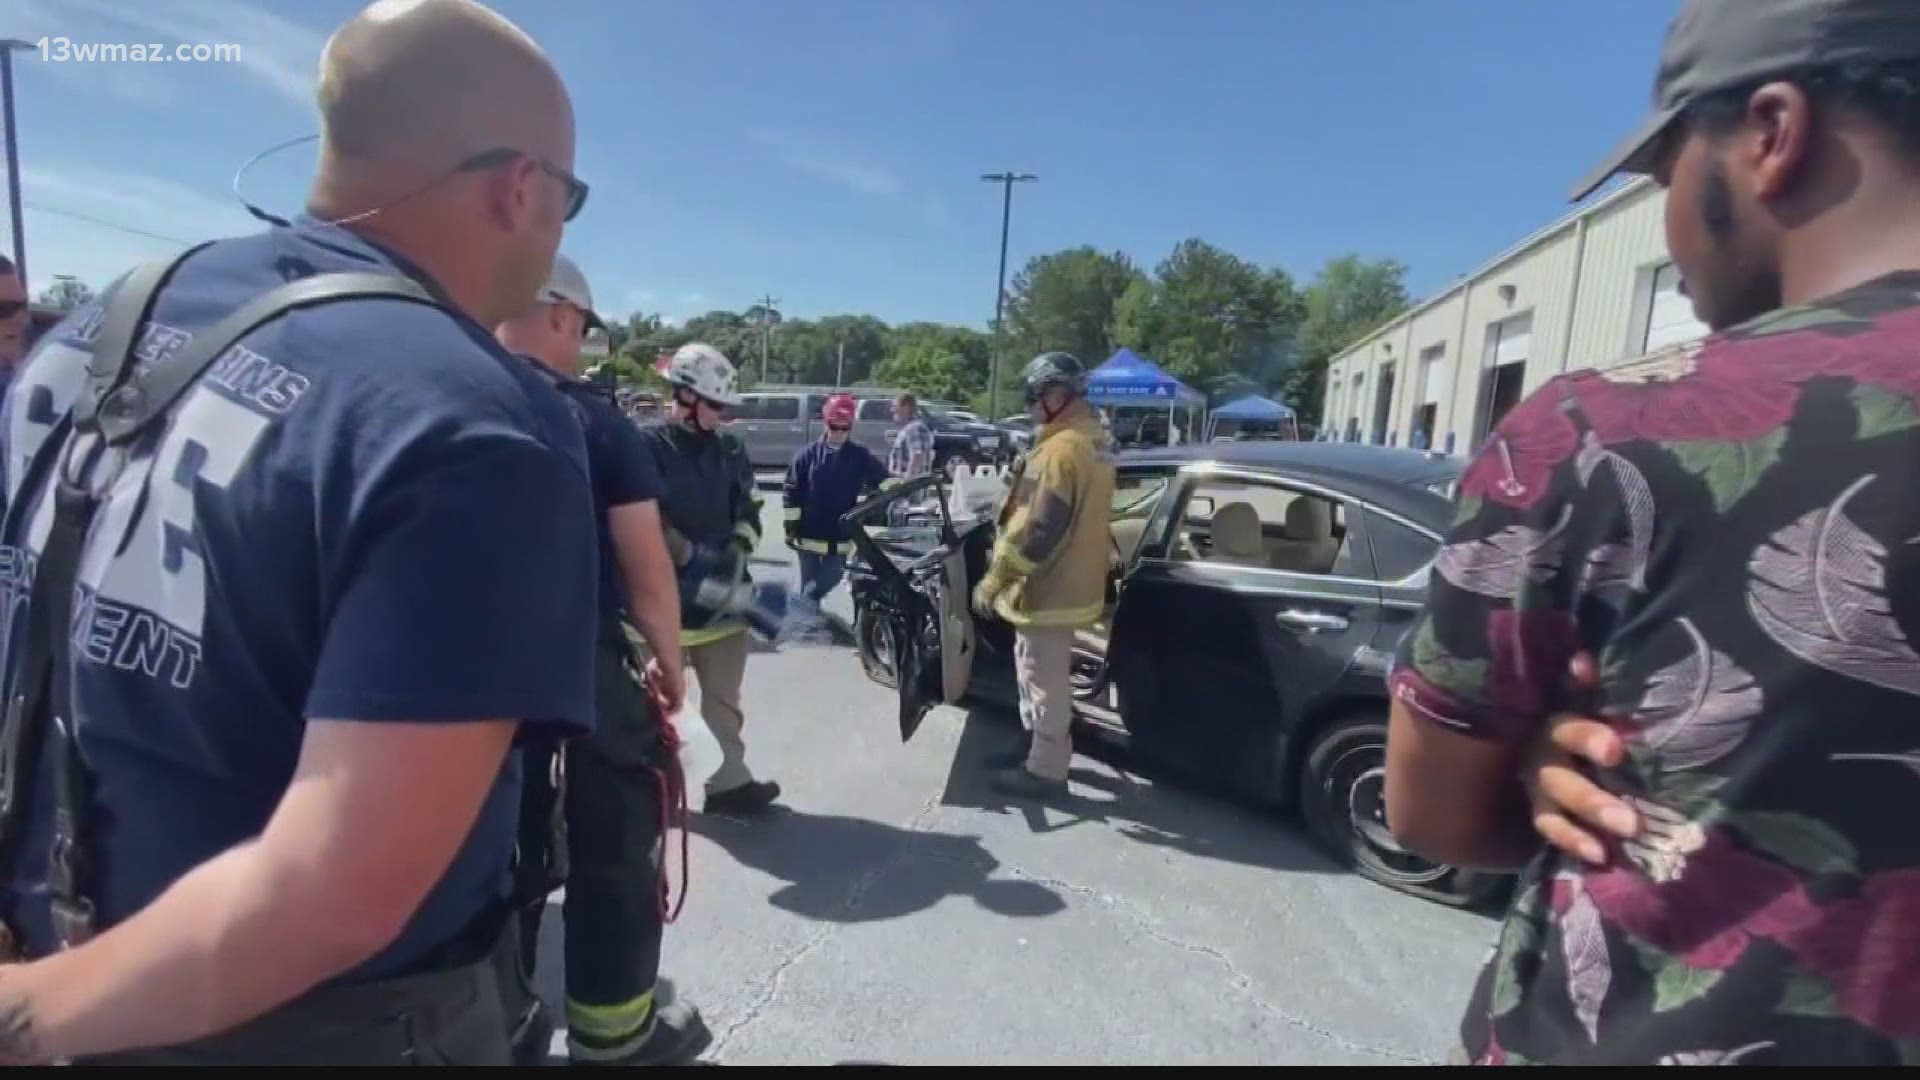 The event featured demonstrations on how to get someone out of a vehicle during an emergency.